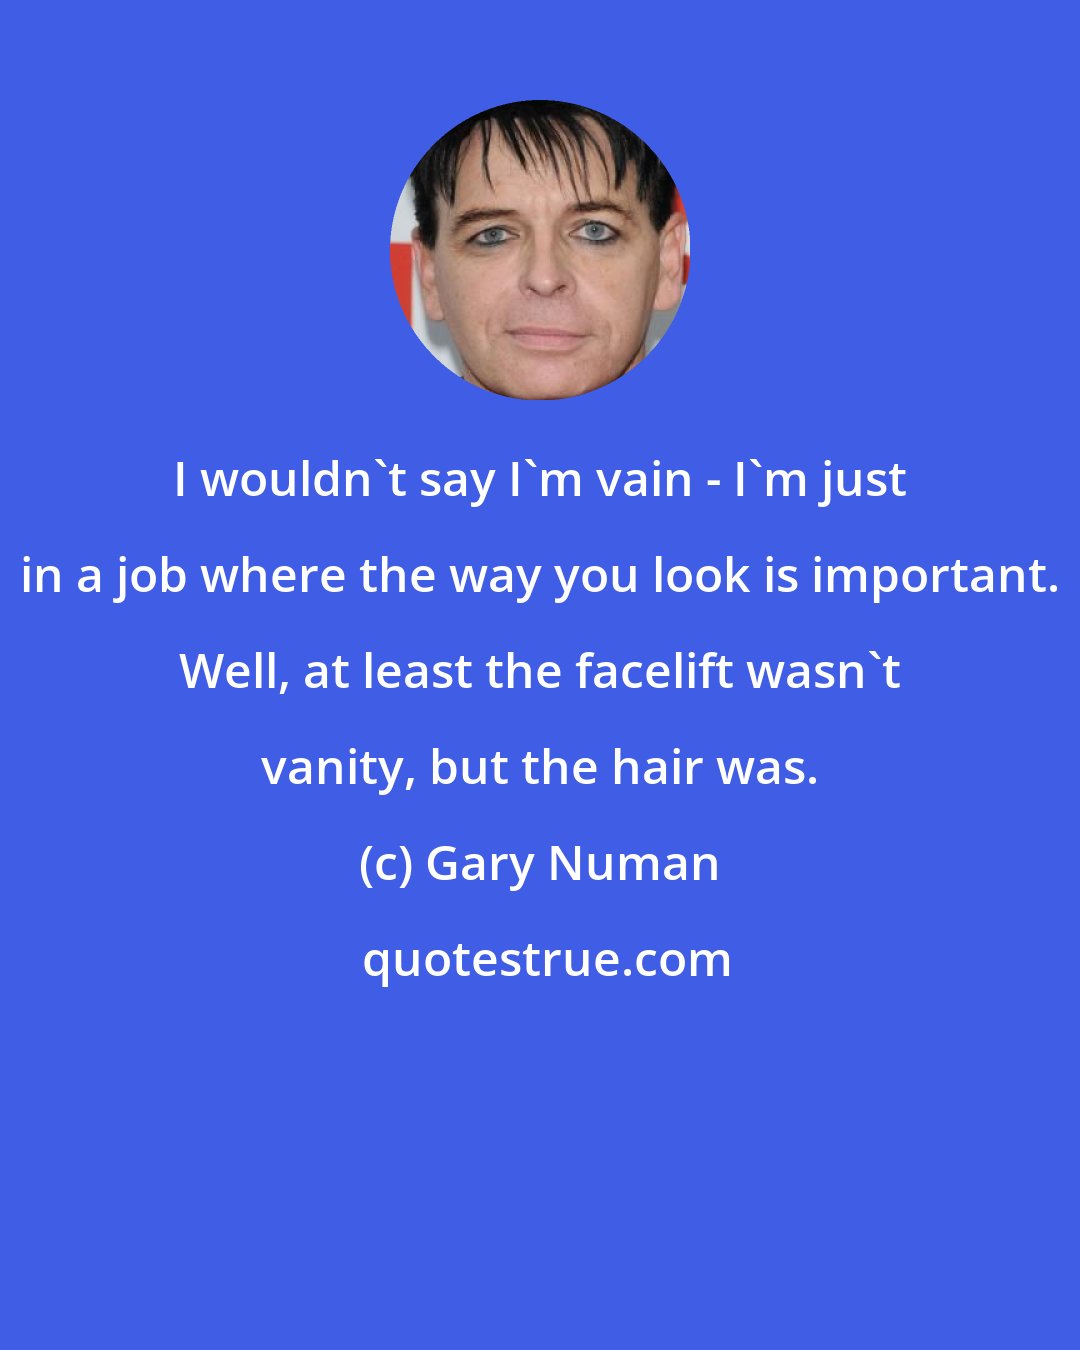 Gary Numan: I wouldn't say I'm vain - I'm just in a job where the way you look is important. Well, at least the facelift wasn't vanity, but the hair was.